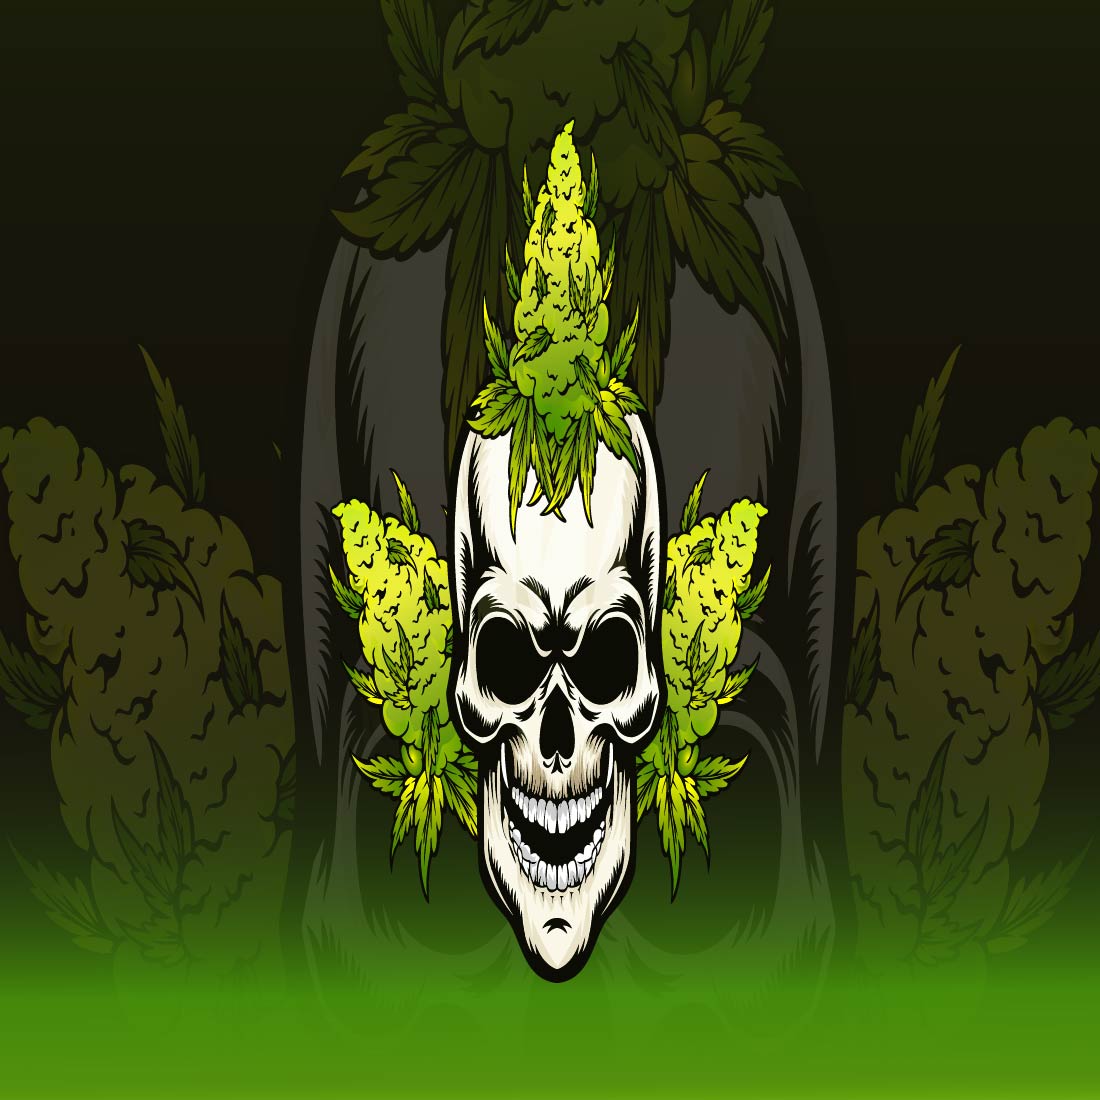 Skull with a plant on its head.